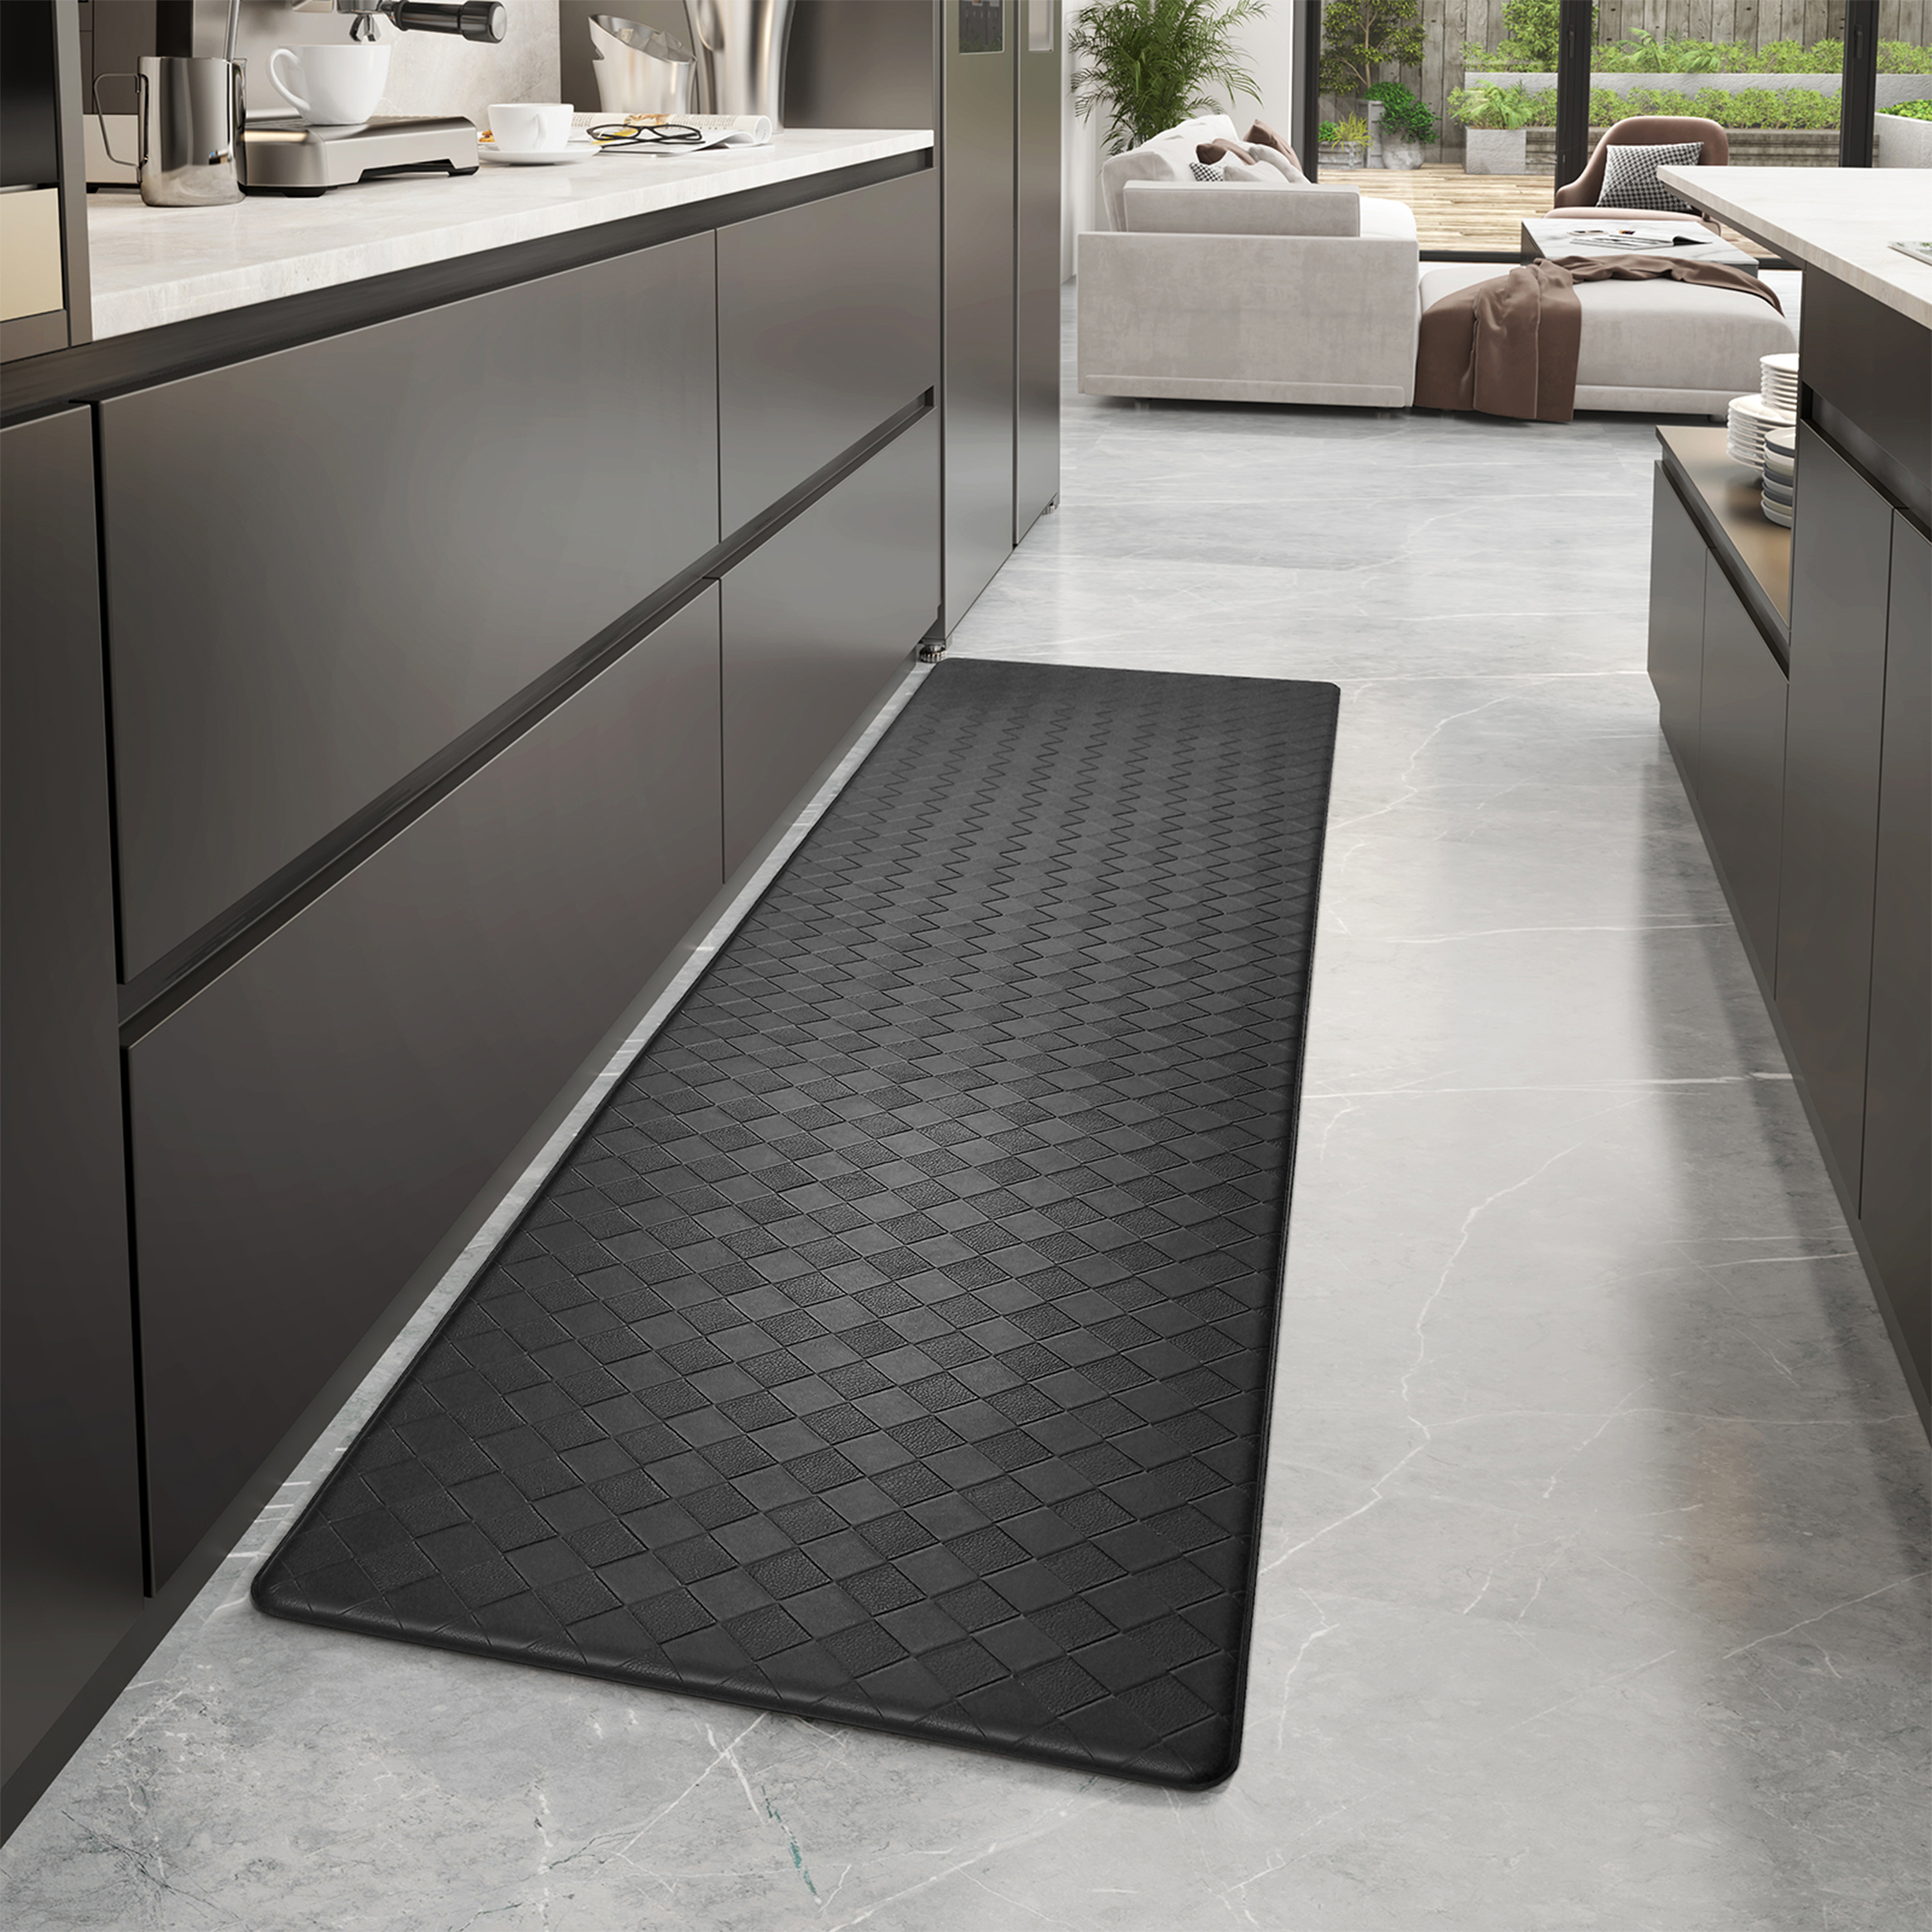 PABUBE Kitchen Mat Cushioned Anti Fatigue Kitchen Rugs Waterproof Non-Slip Comfort Standing Mat for Kitchen, Floor, Office, Sink, Black, 17" x 47" - image 1 of 8